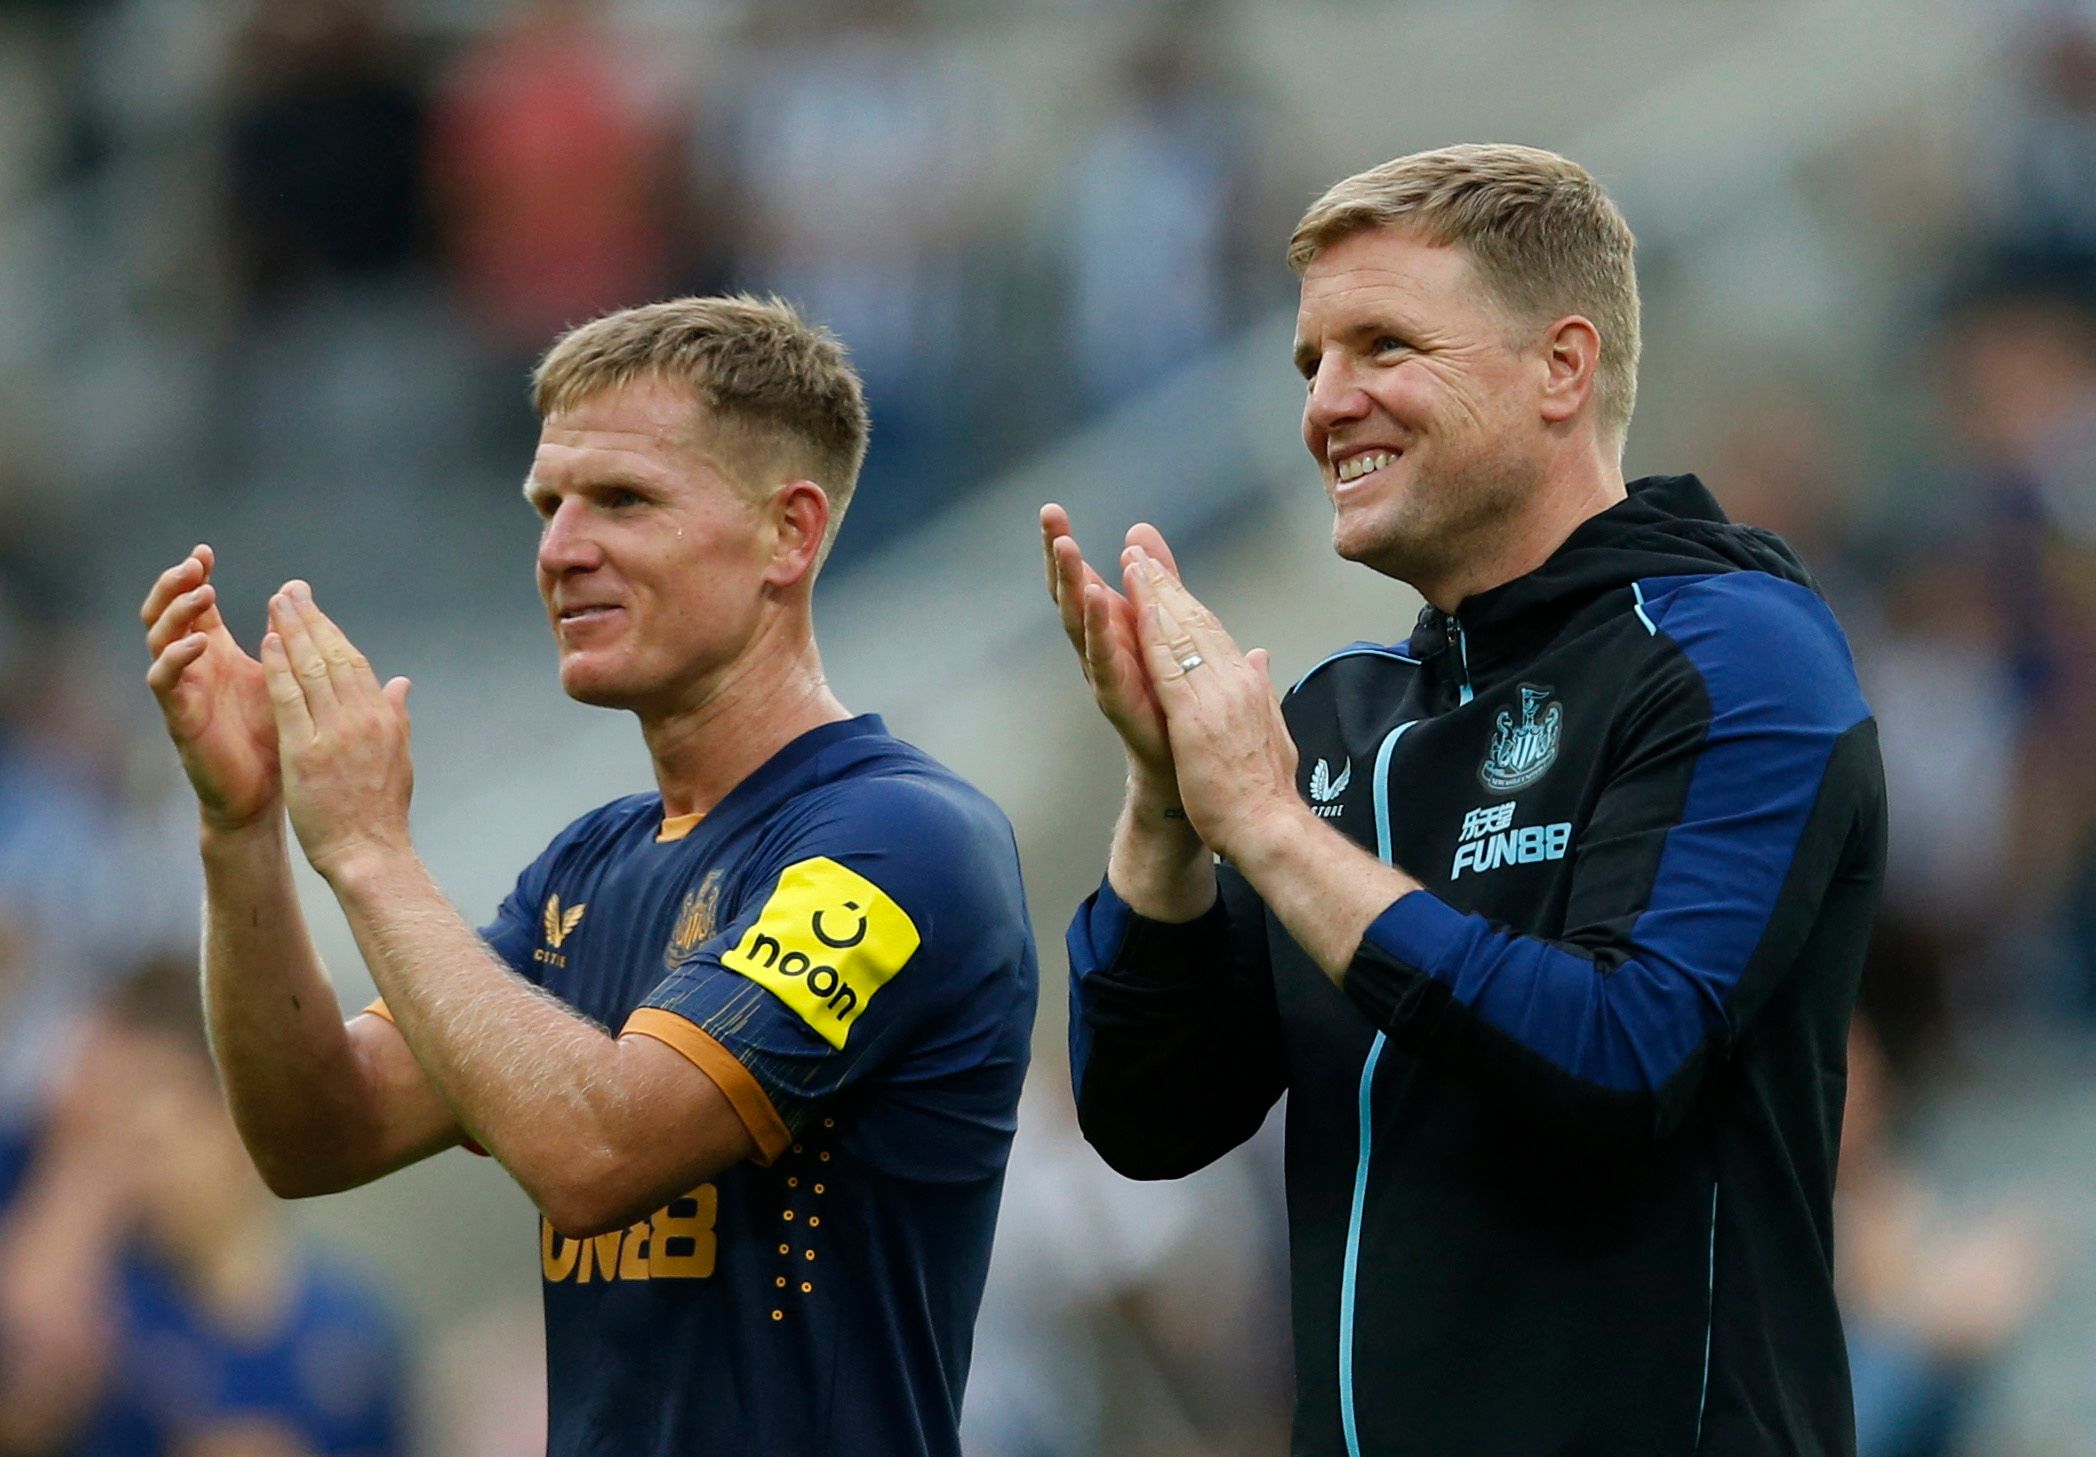 Newcastle: Matt Ritchie ‘been told’ he can leave in January -Follow up